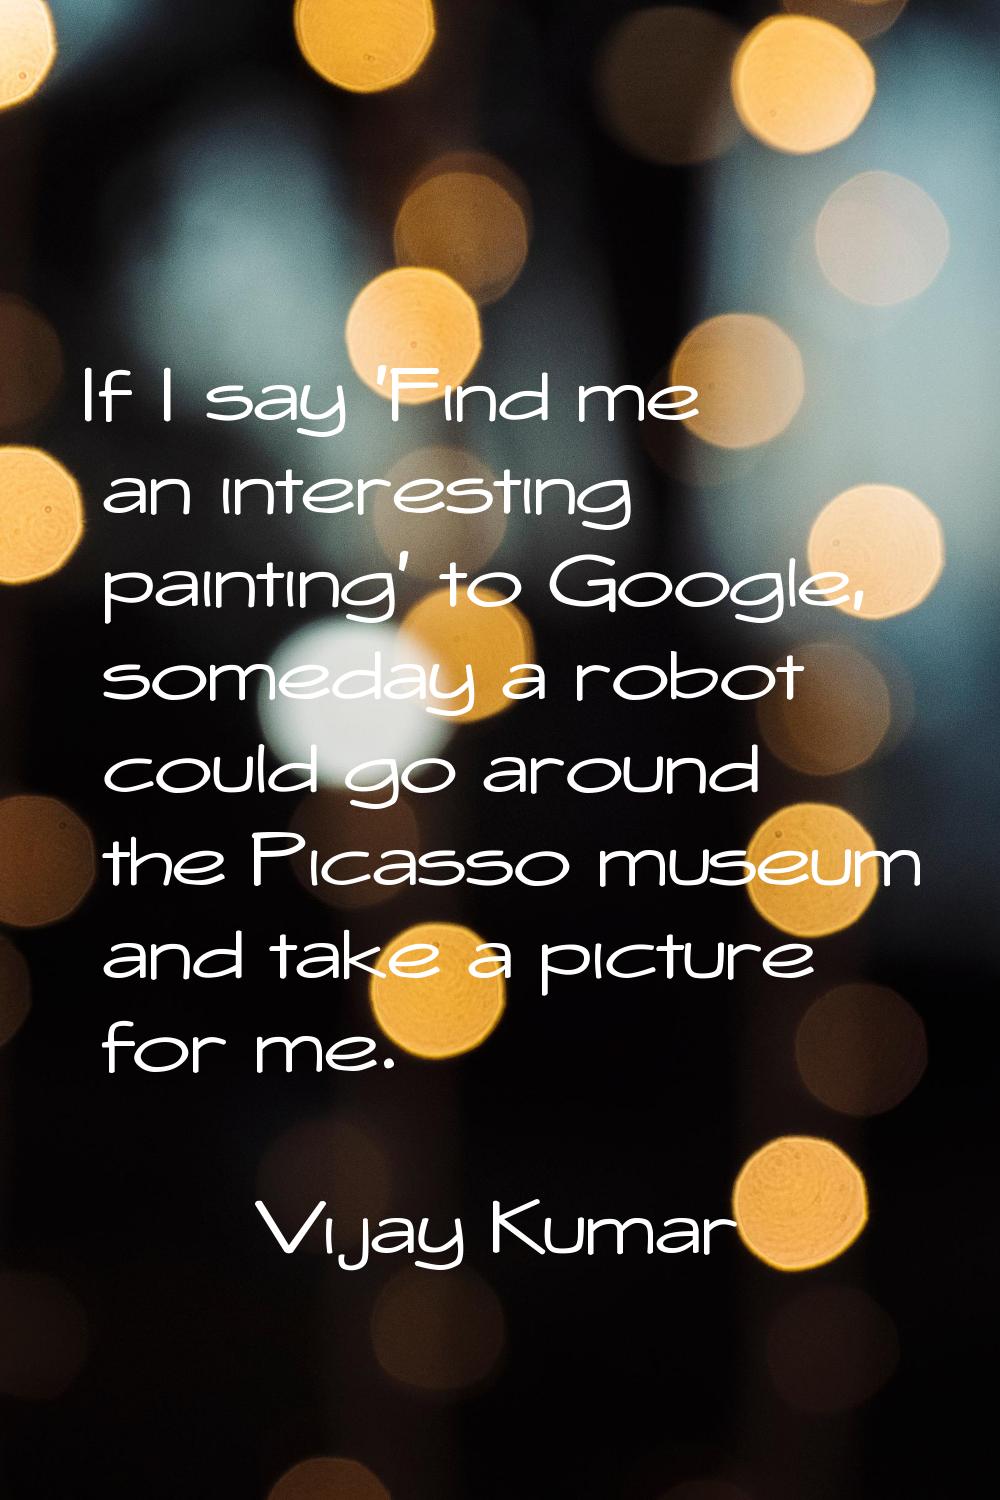 If I say 'Find me an interesting painting' to Google, someday a robot could go around the Picasso m